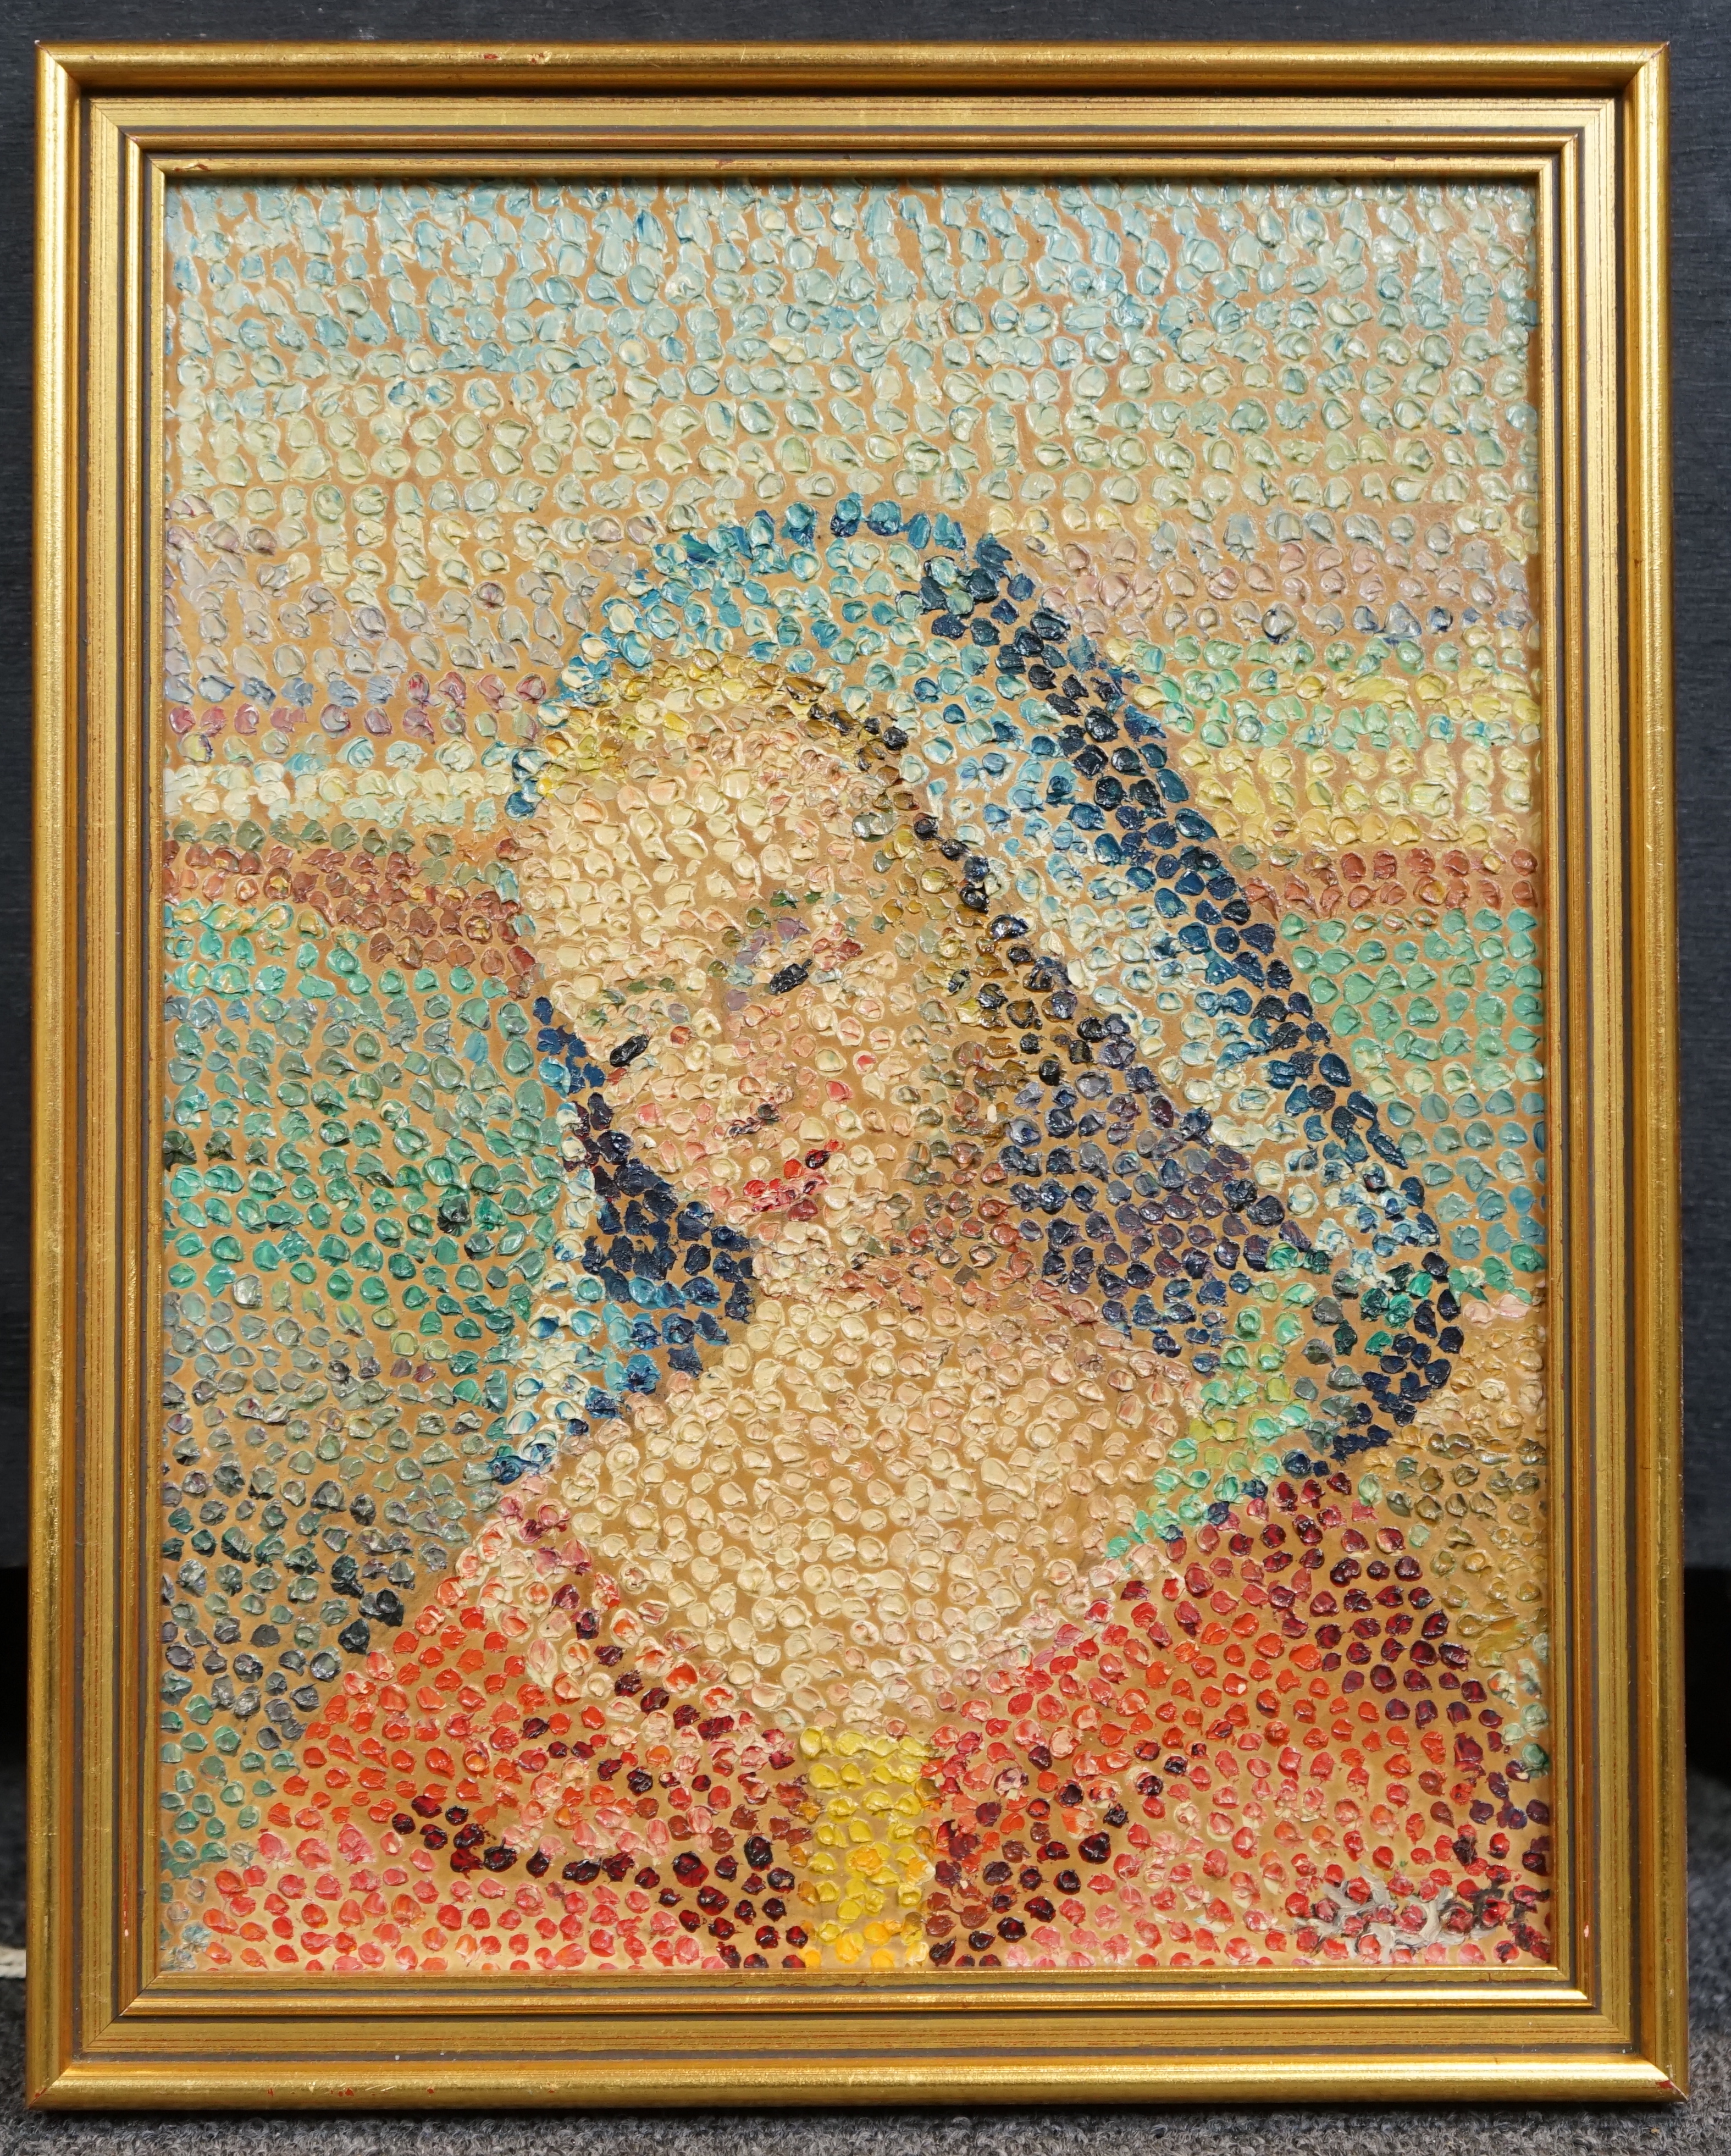 Countess Ginette de Malet Roquefort (French, 1903-1967), 'The Byzantine Madonna', oil on card, 26.5 x 20.5cm